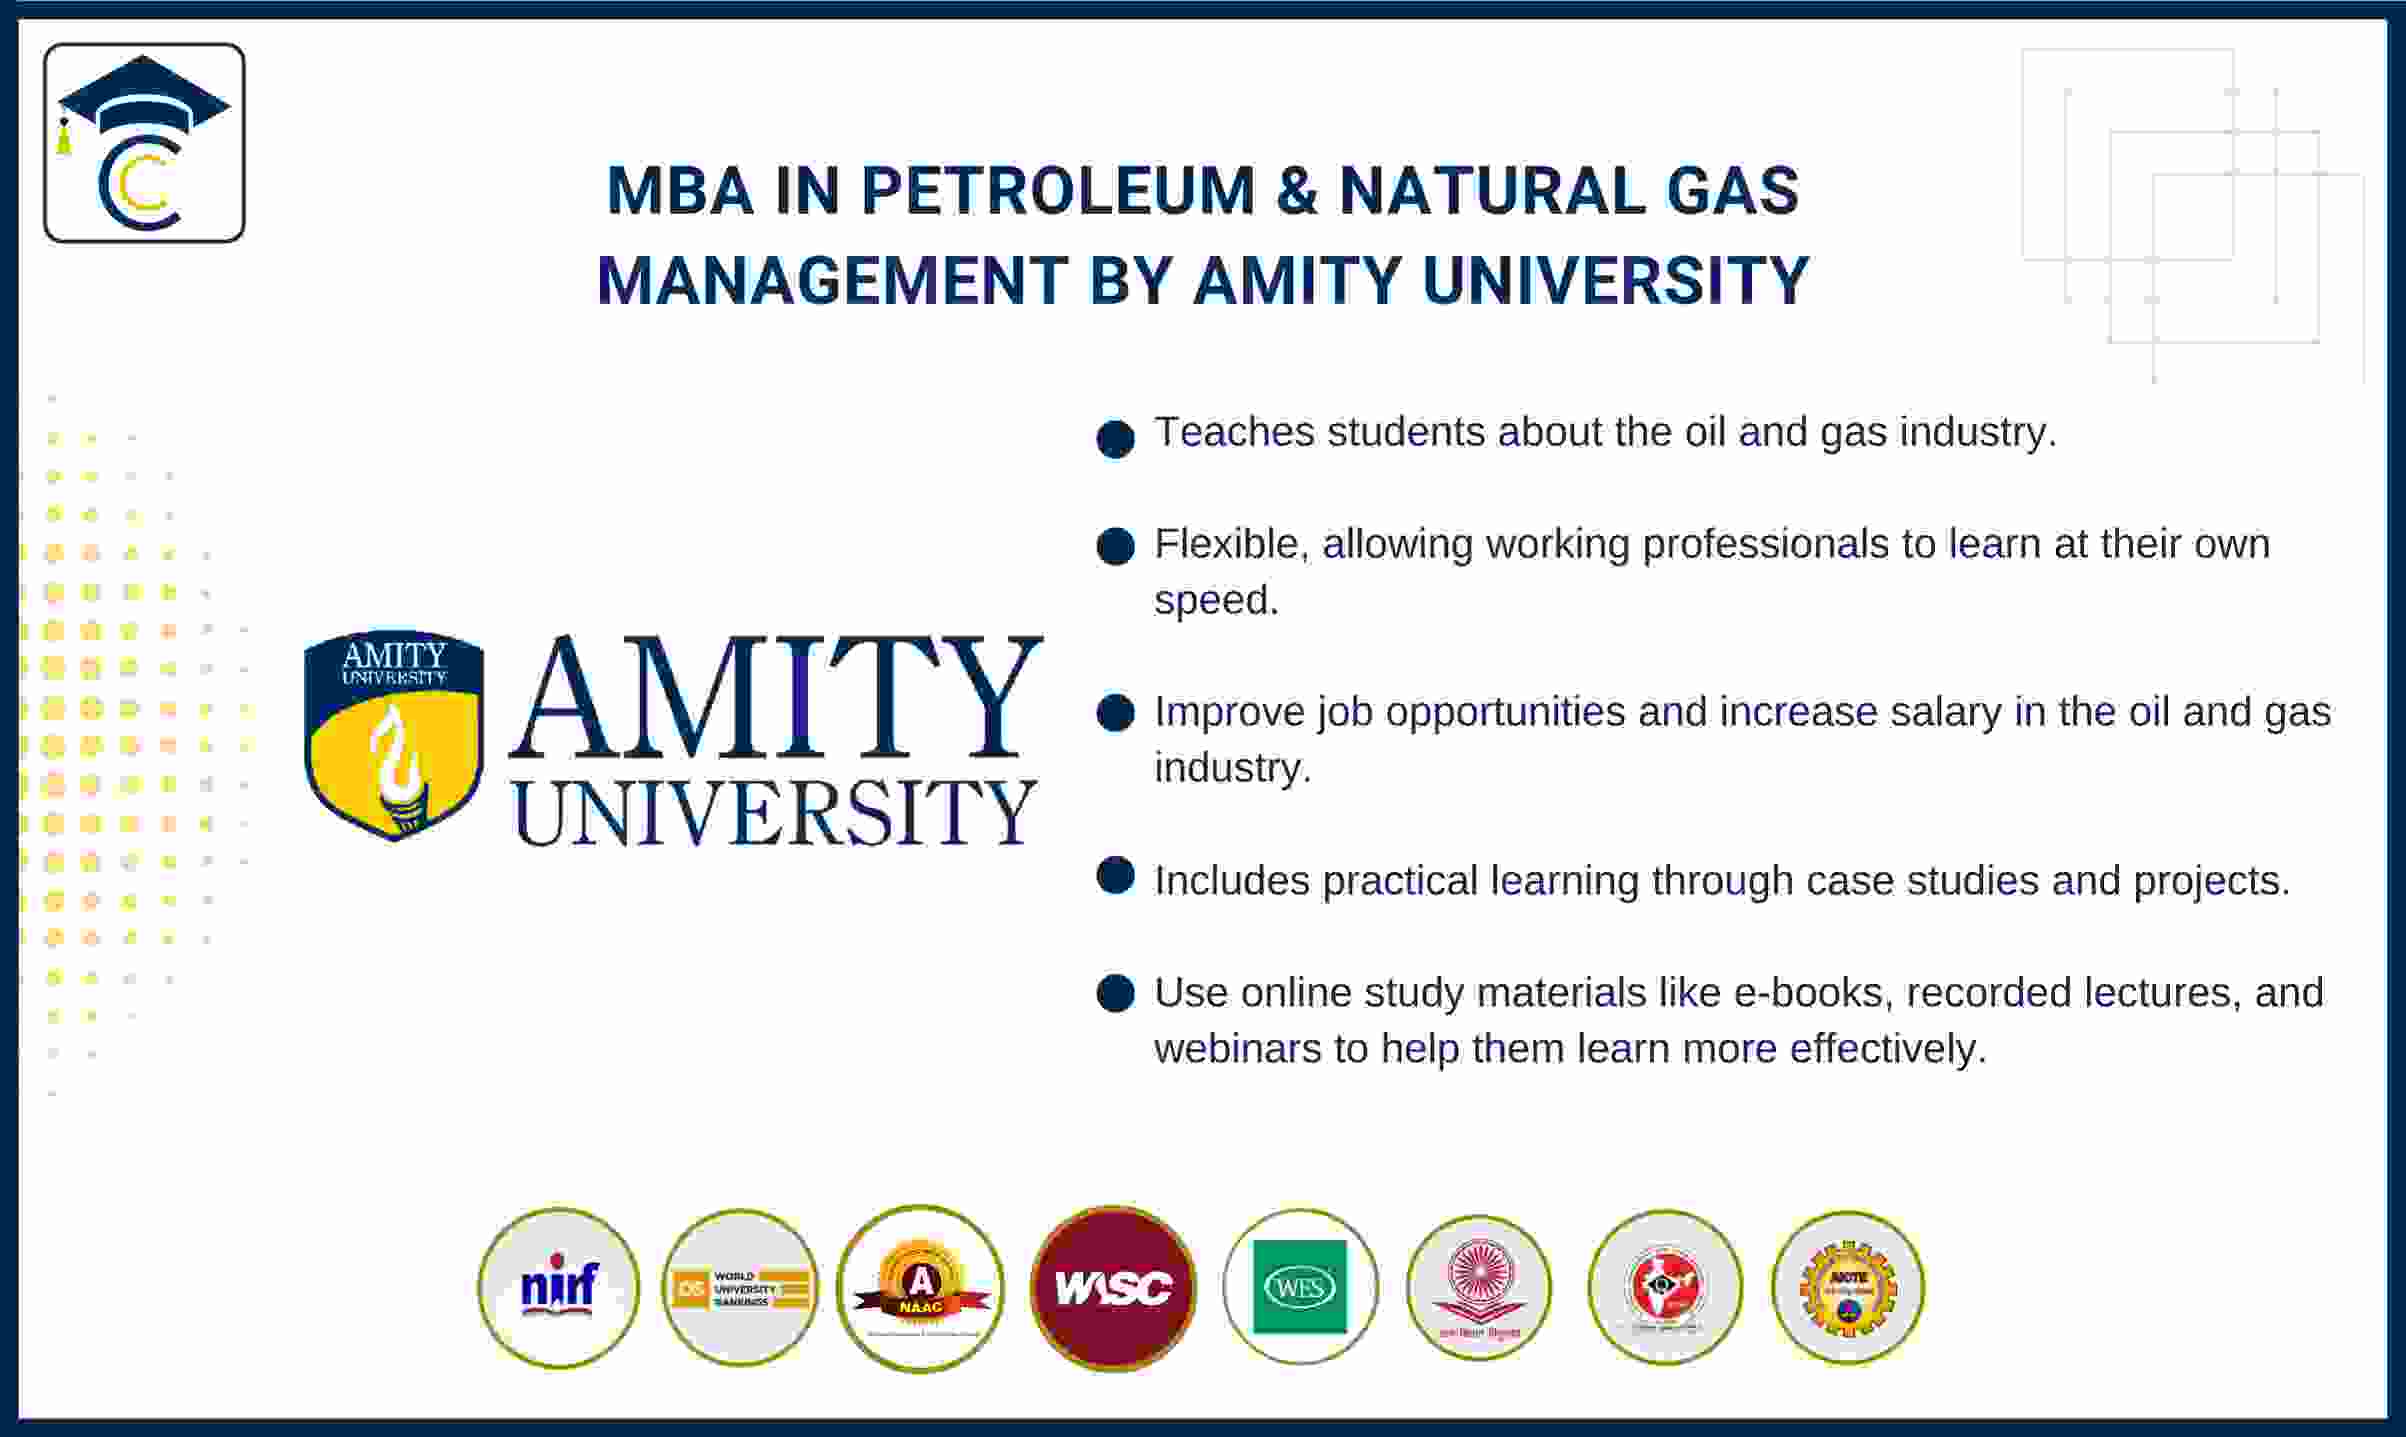 mba-in-petroleum-and-natural-gas-management-amity-university